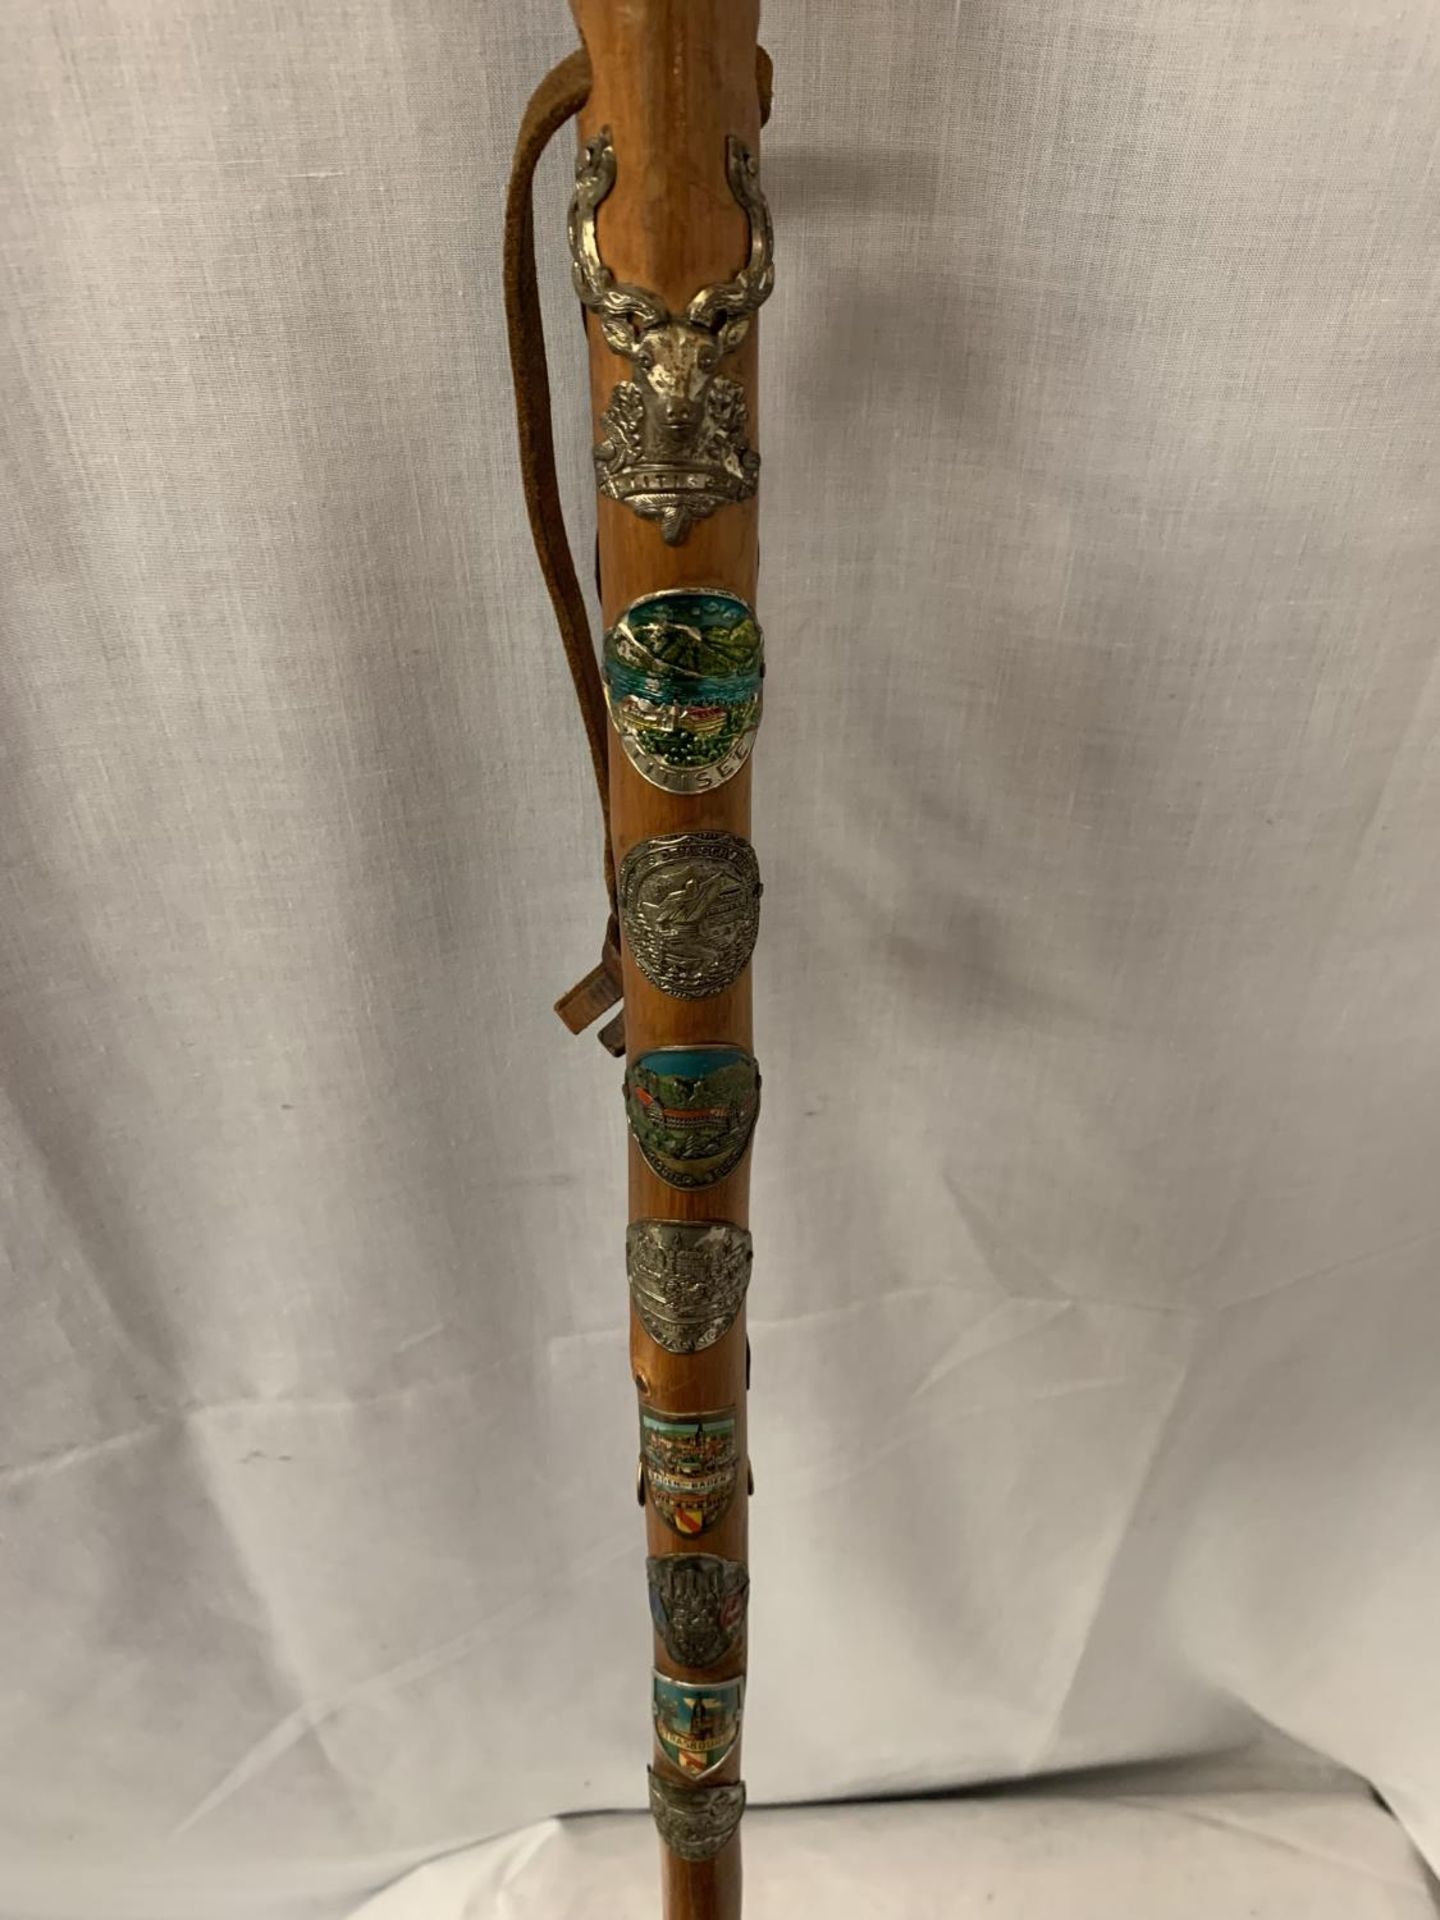 A WOODEN WALKING CANE WITH METAL TIP, LEATHER STRAP AND VARIOUS BADGES FROM THE ALPS - Image 2 of 3